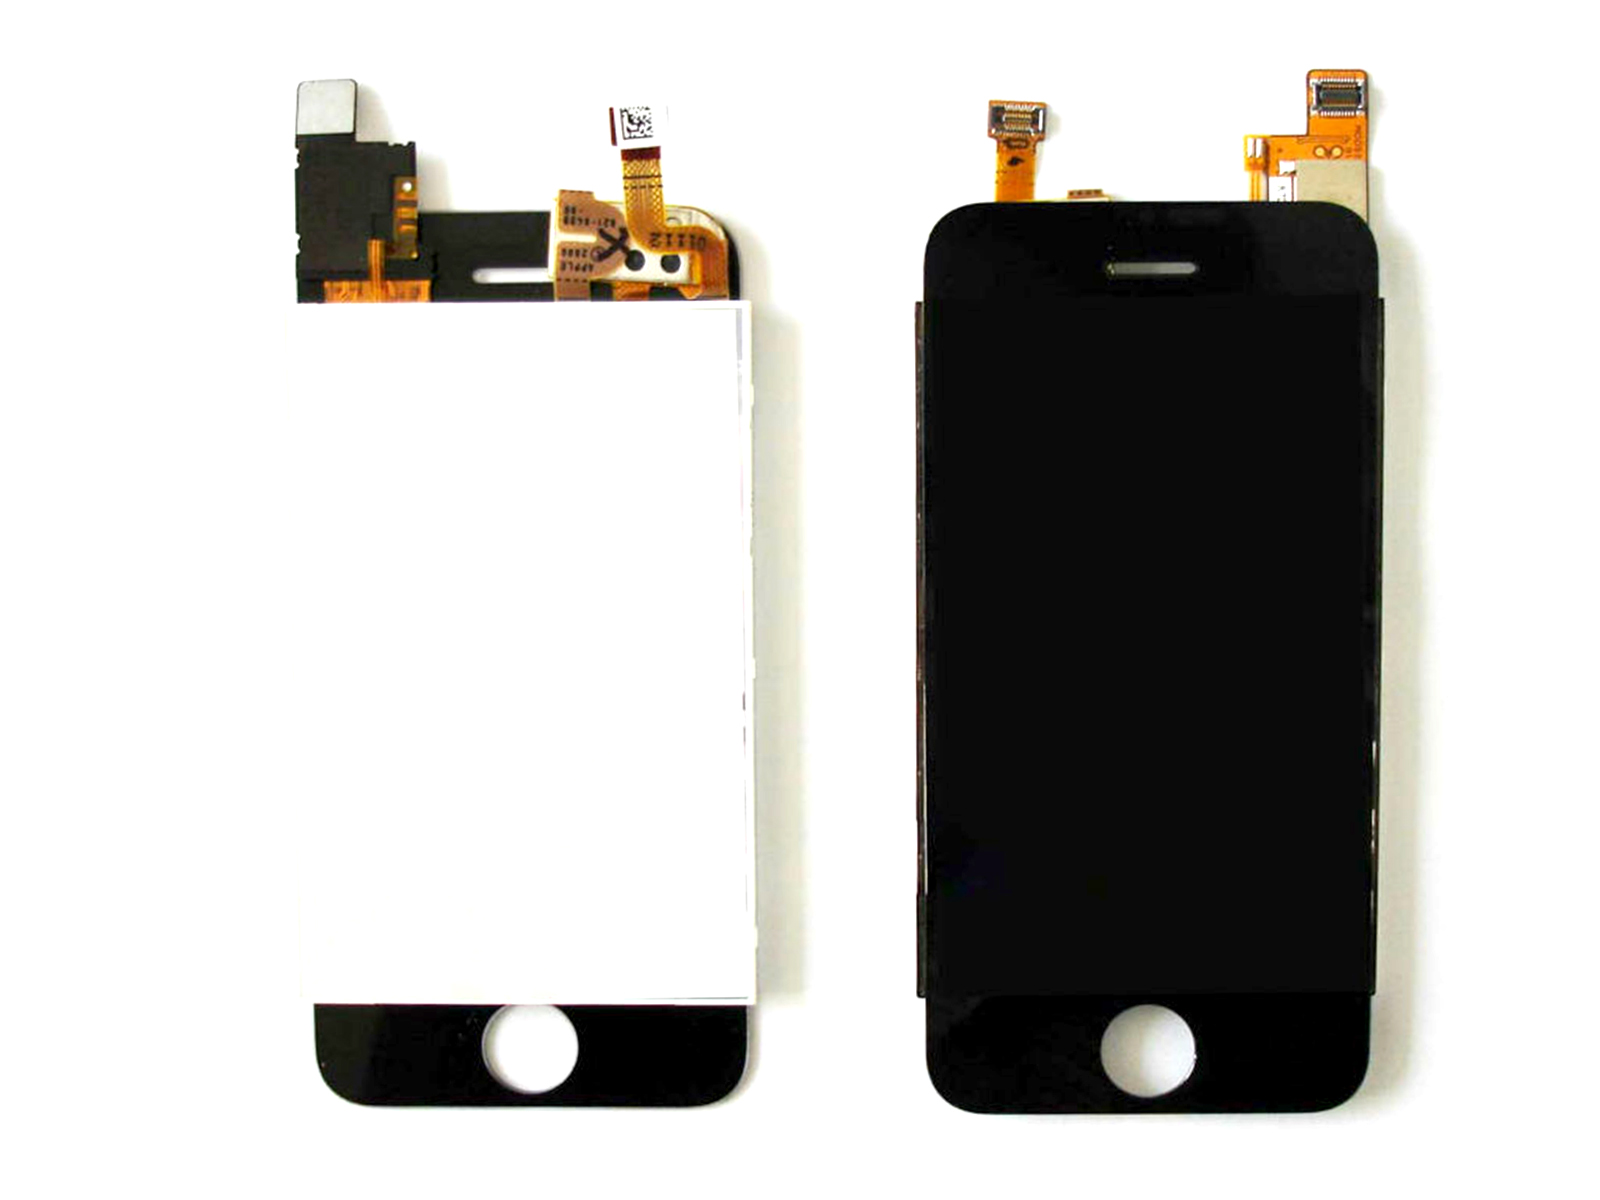 Iphone 2G Assembly